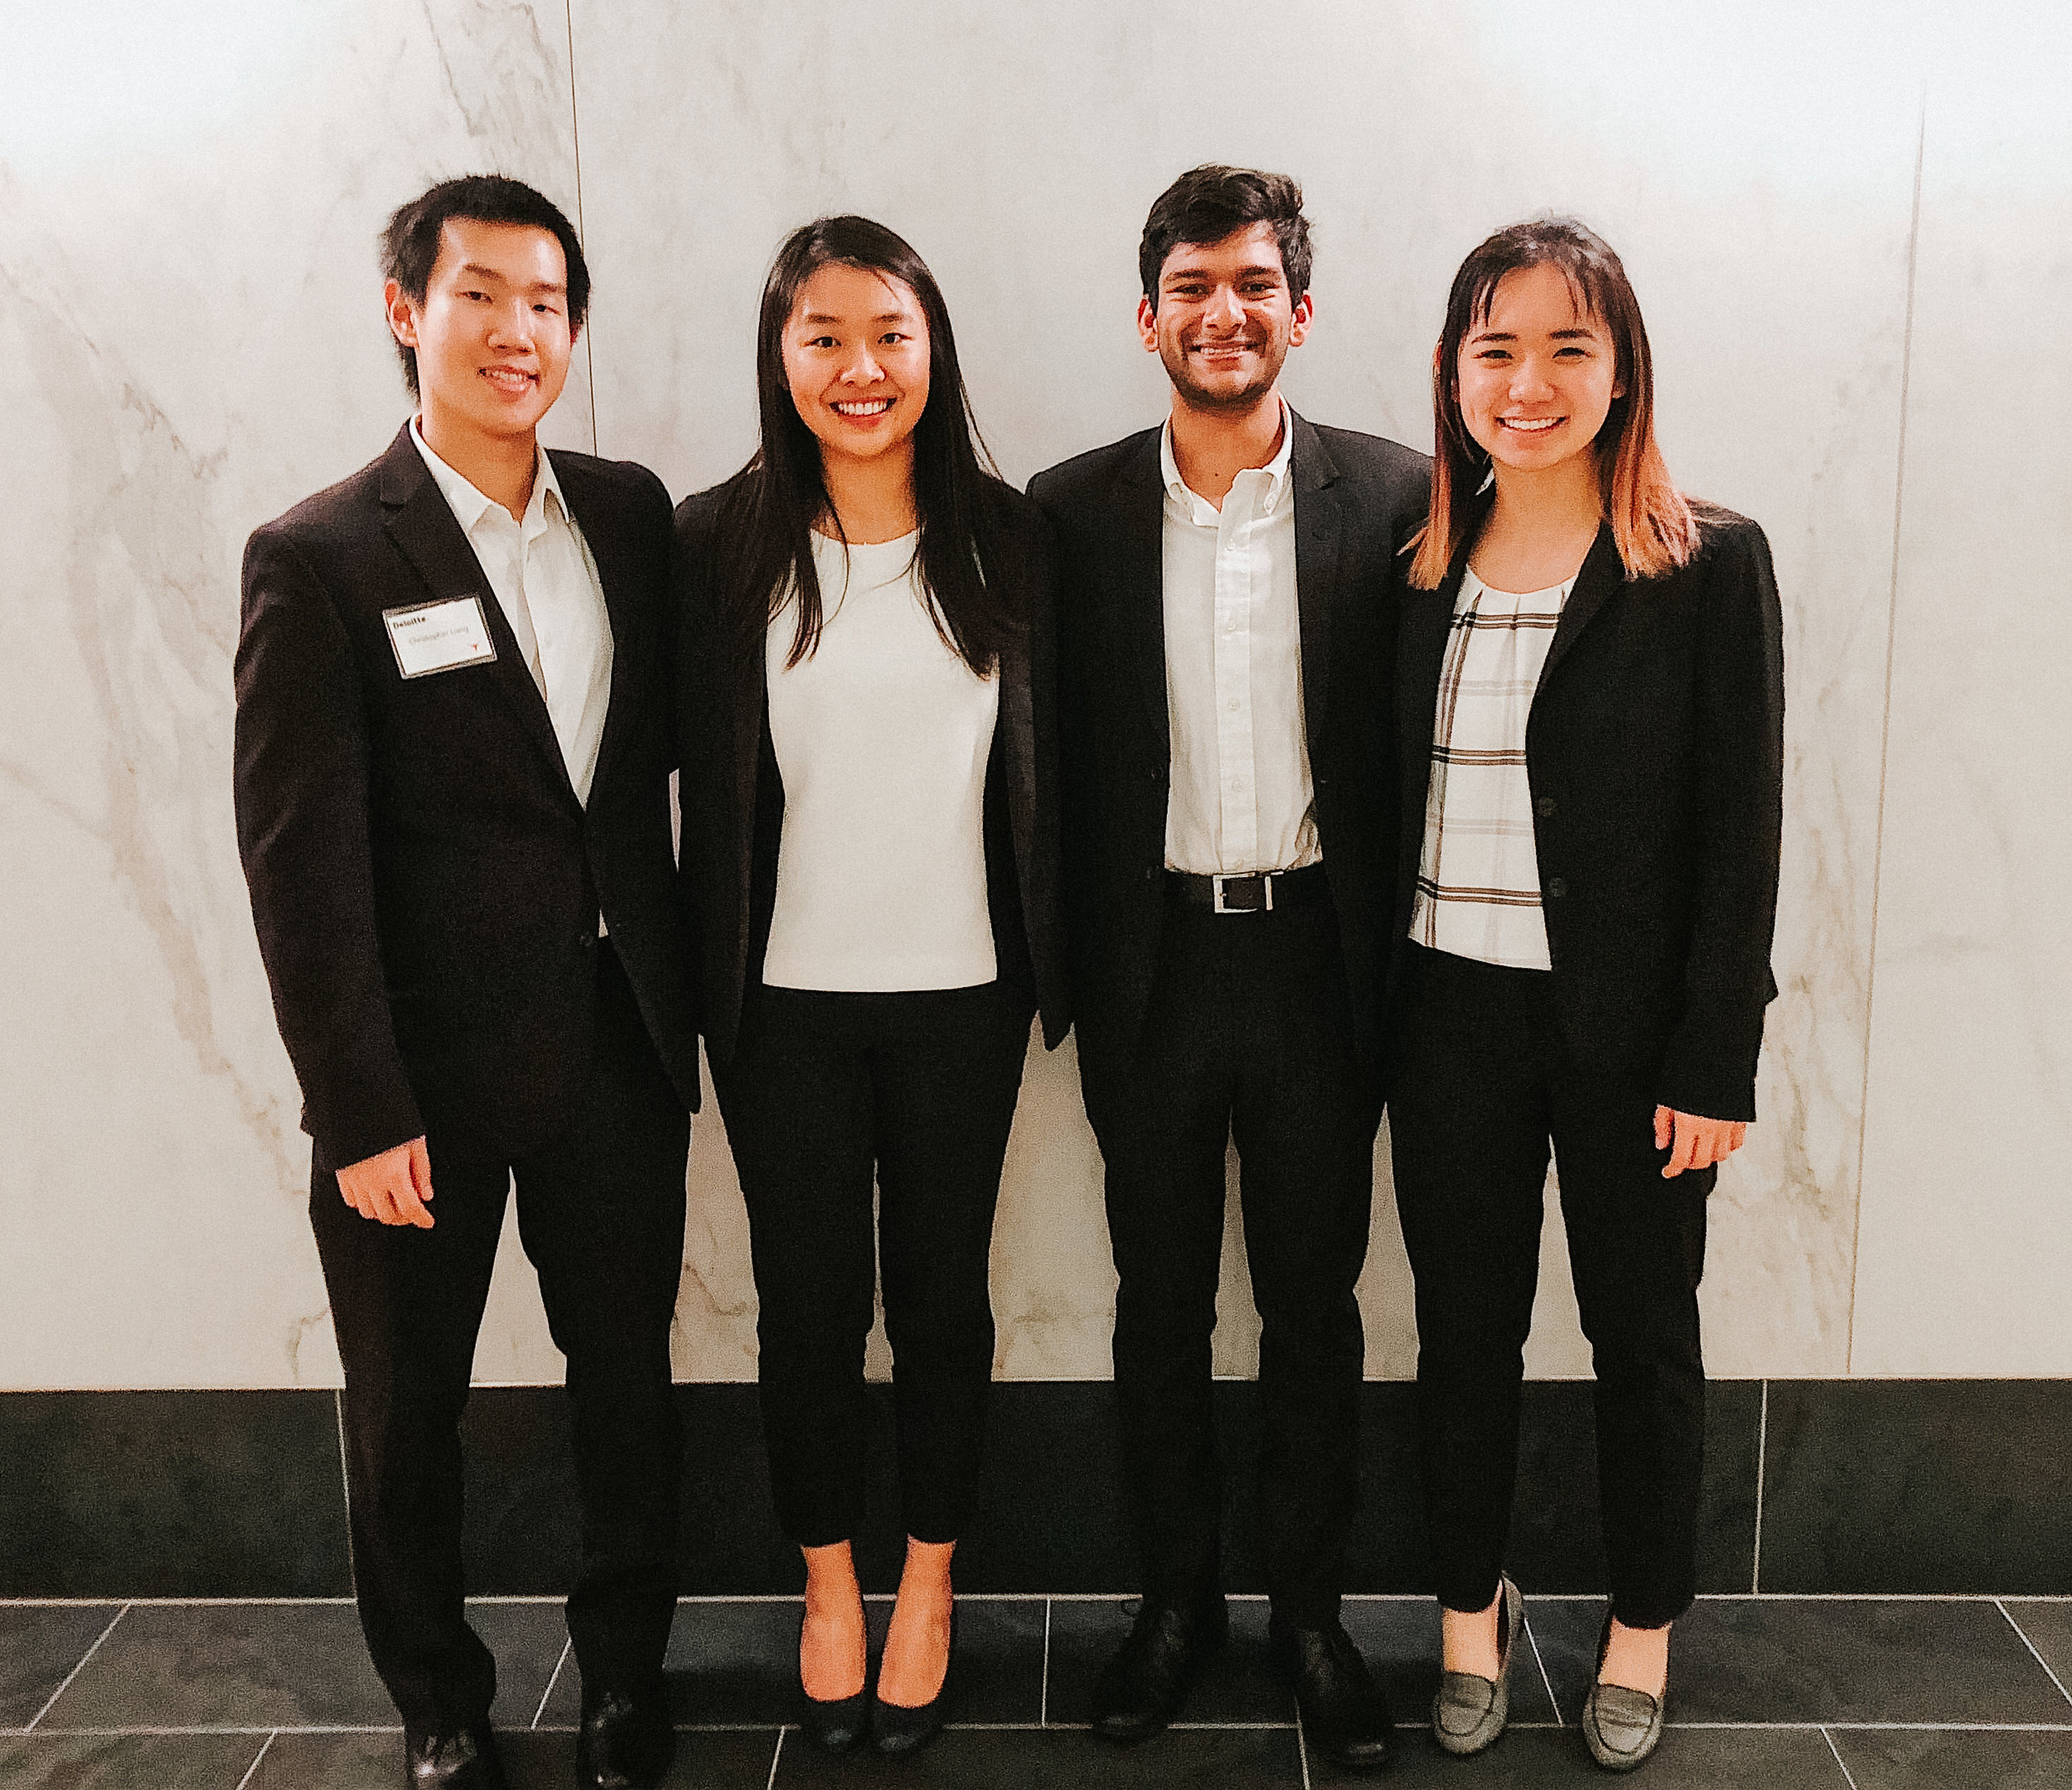 2018 Deloitte Risk and Financial Advisory Regional Case Competition